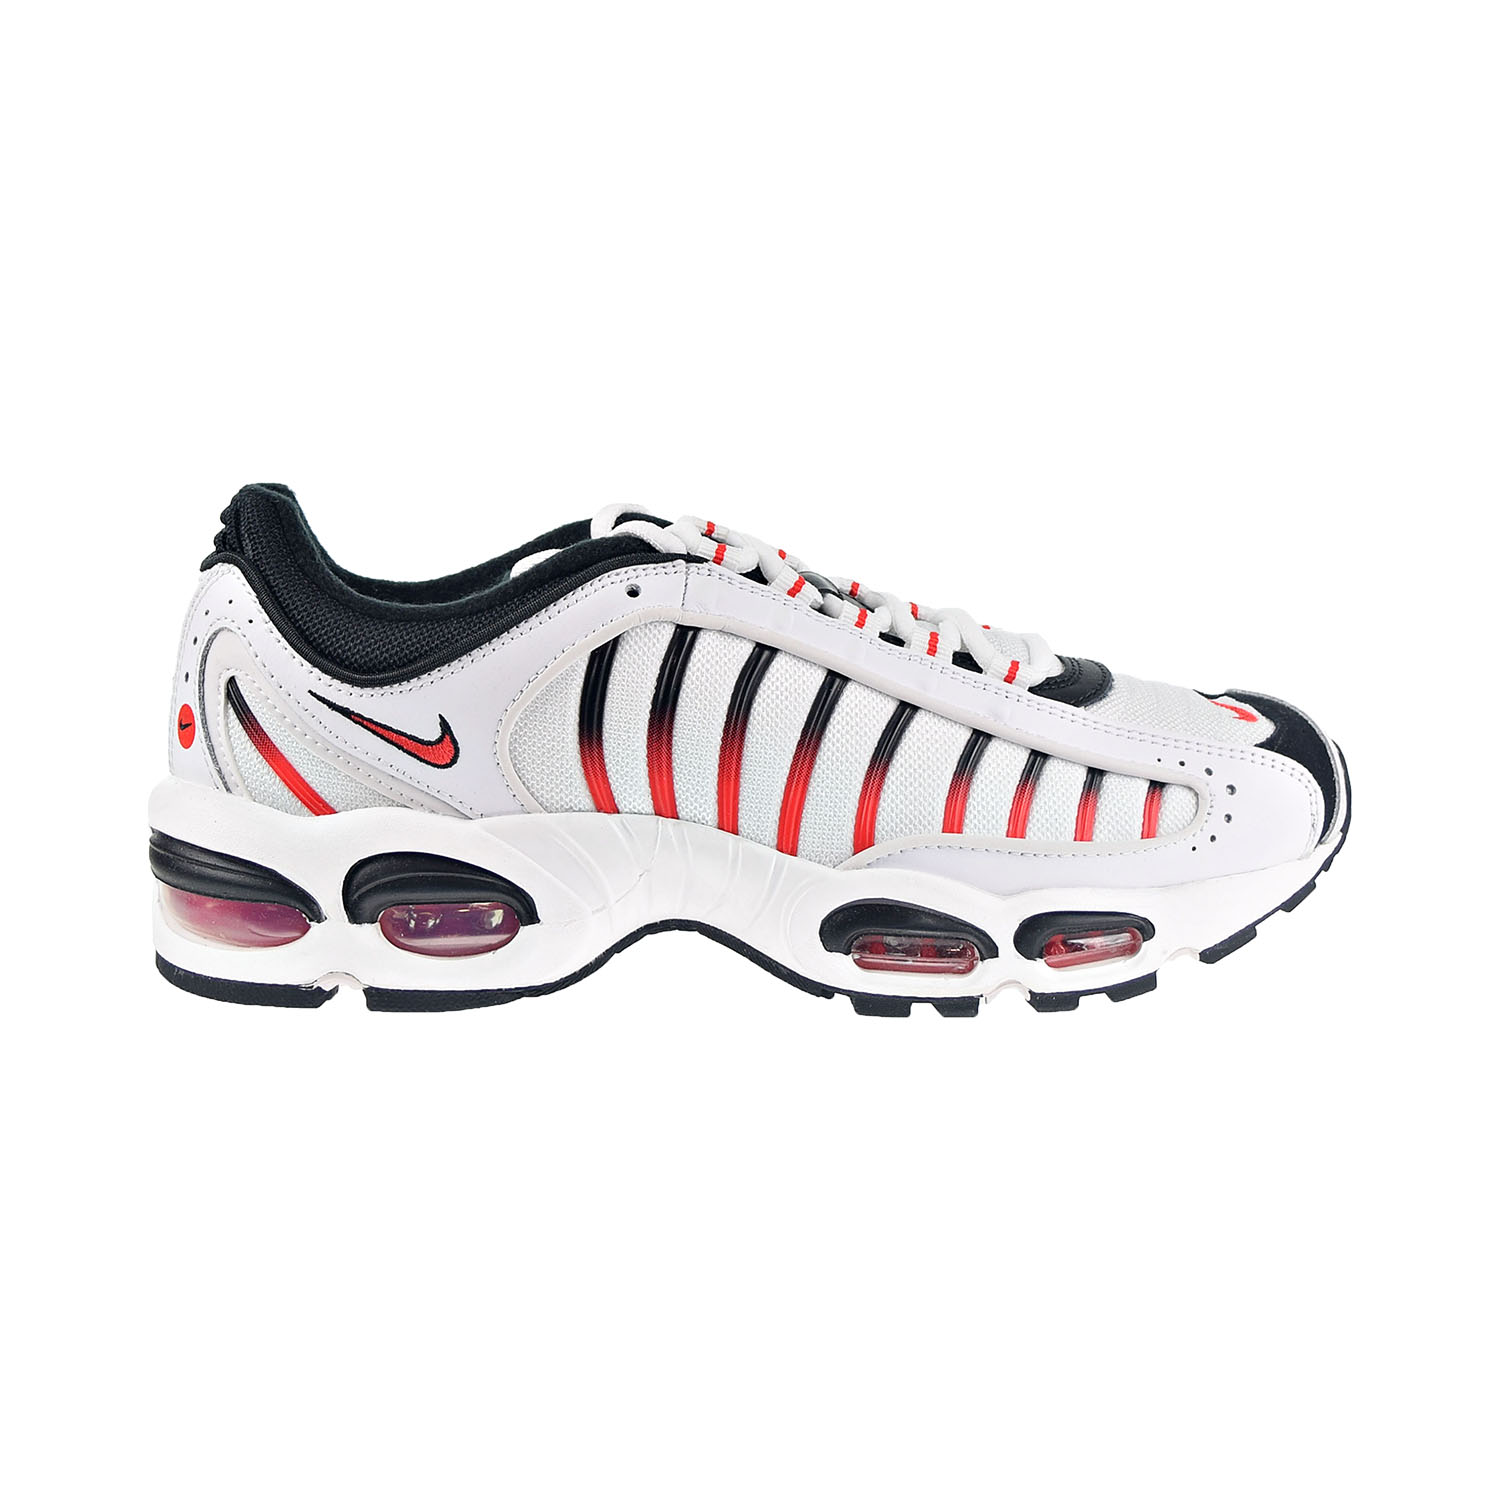 For a day trip Whisper module Nike Air Max Tailwind IV Men's Shoes White-Habanero Red-Black aq2567-104